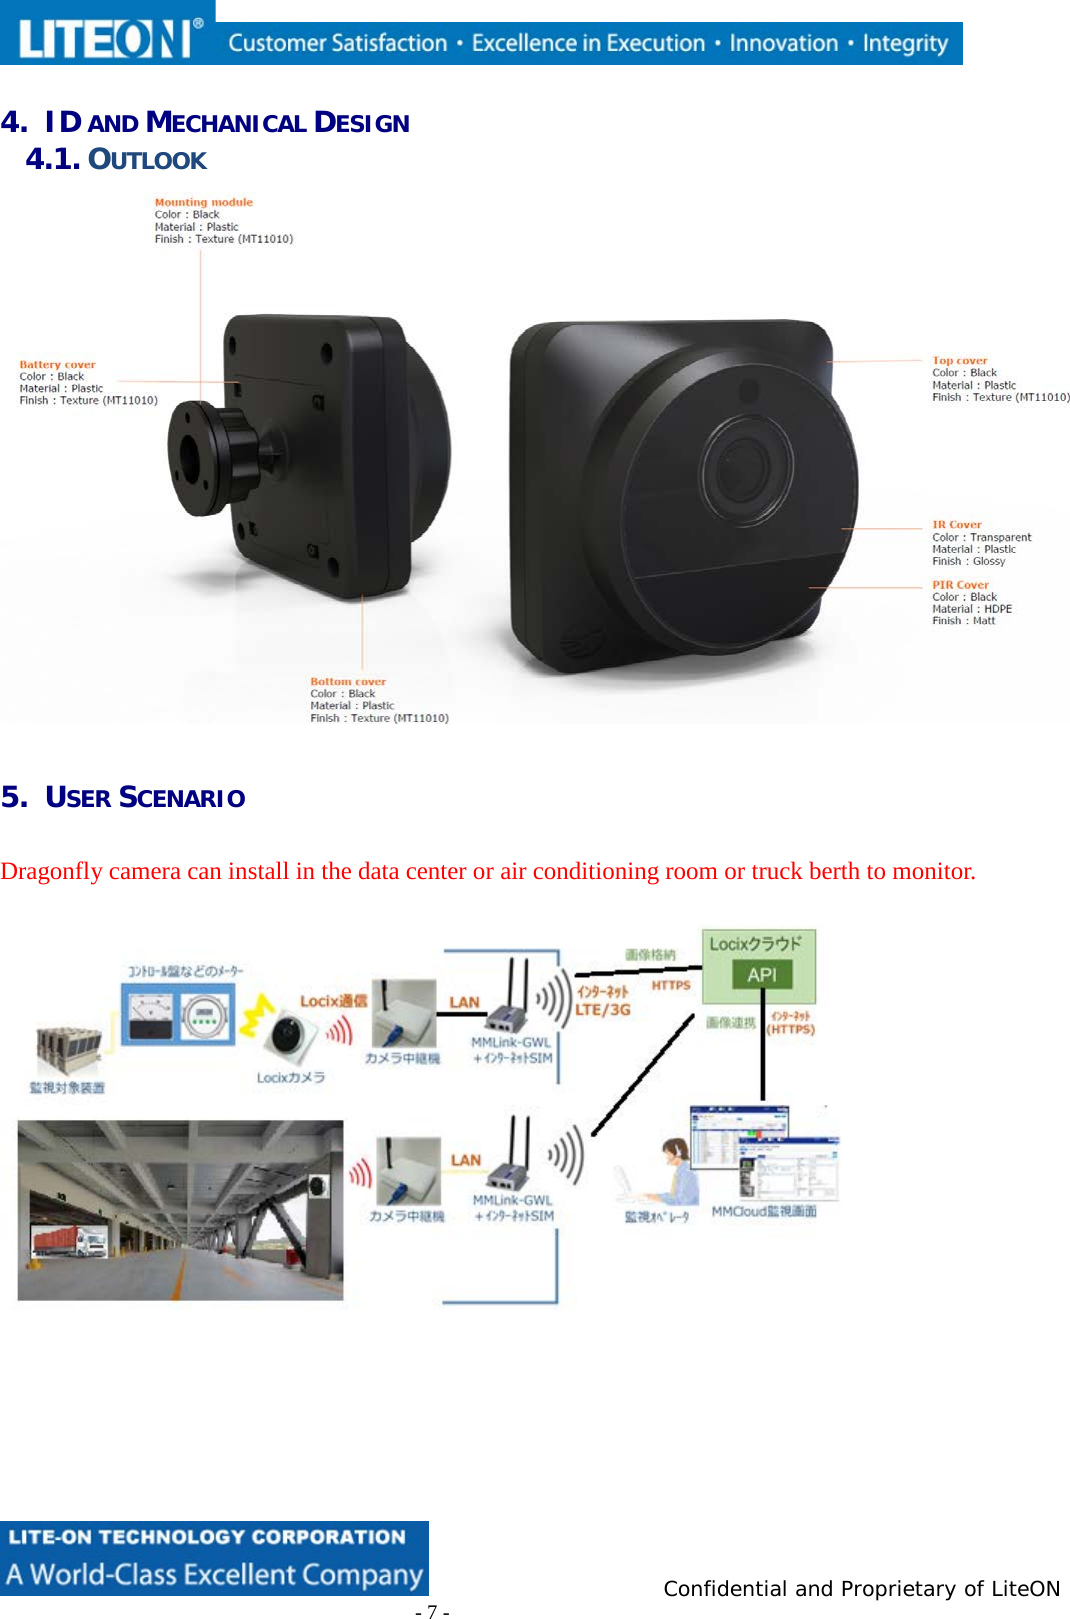                          Confidential and Proprietary of LiteON                         - 7 -  4. ID AND MECHANICAL DESIGN 4.1. OUTLOOK    5. USER SCENARIO  Dragonfly camera can install in the data center or air conditioning room or truck berth to monitor.       